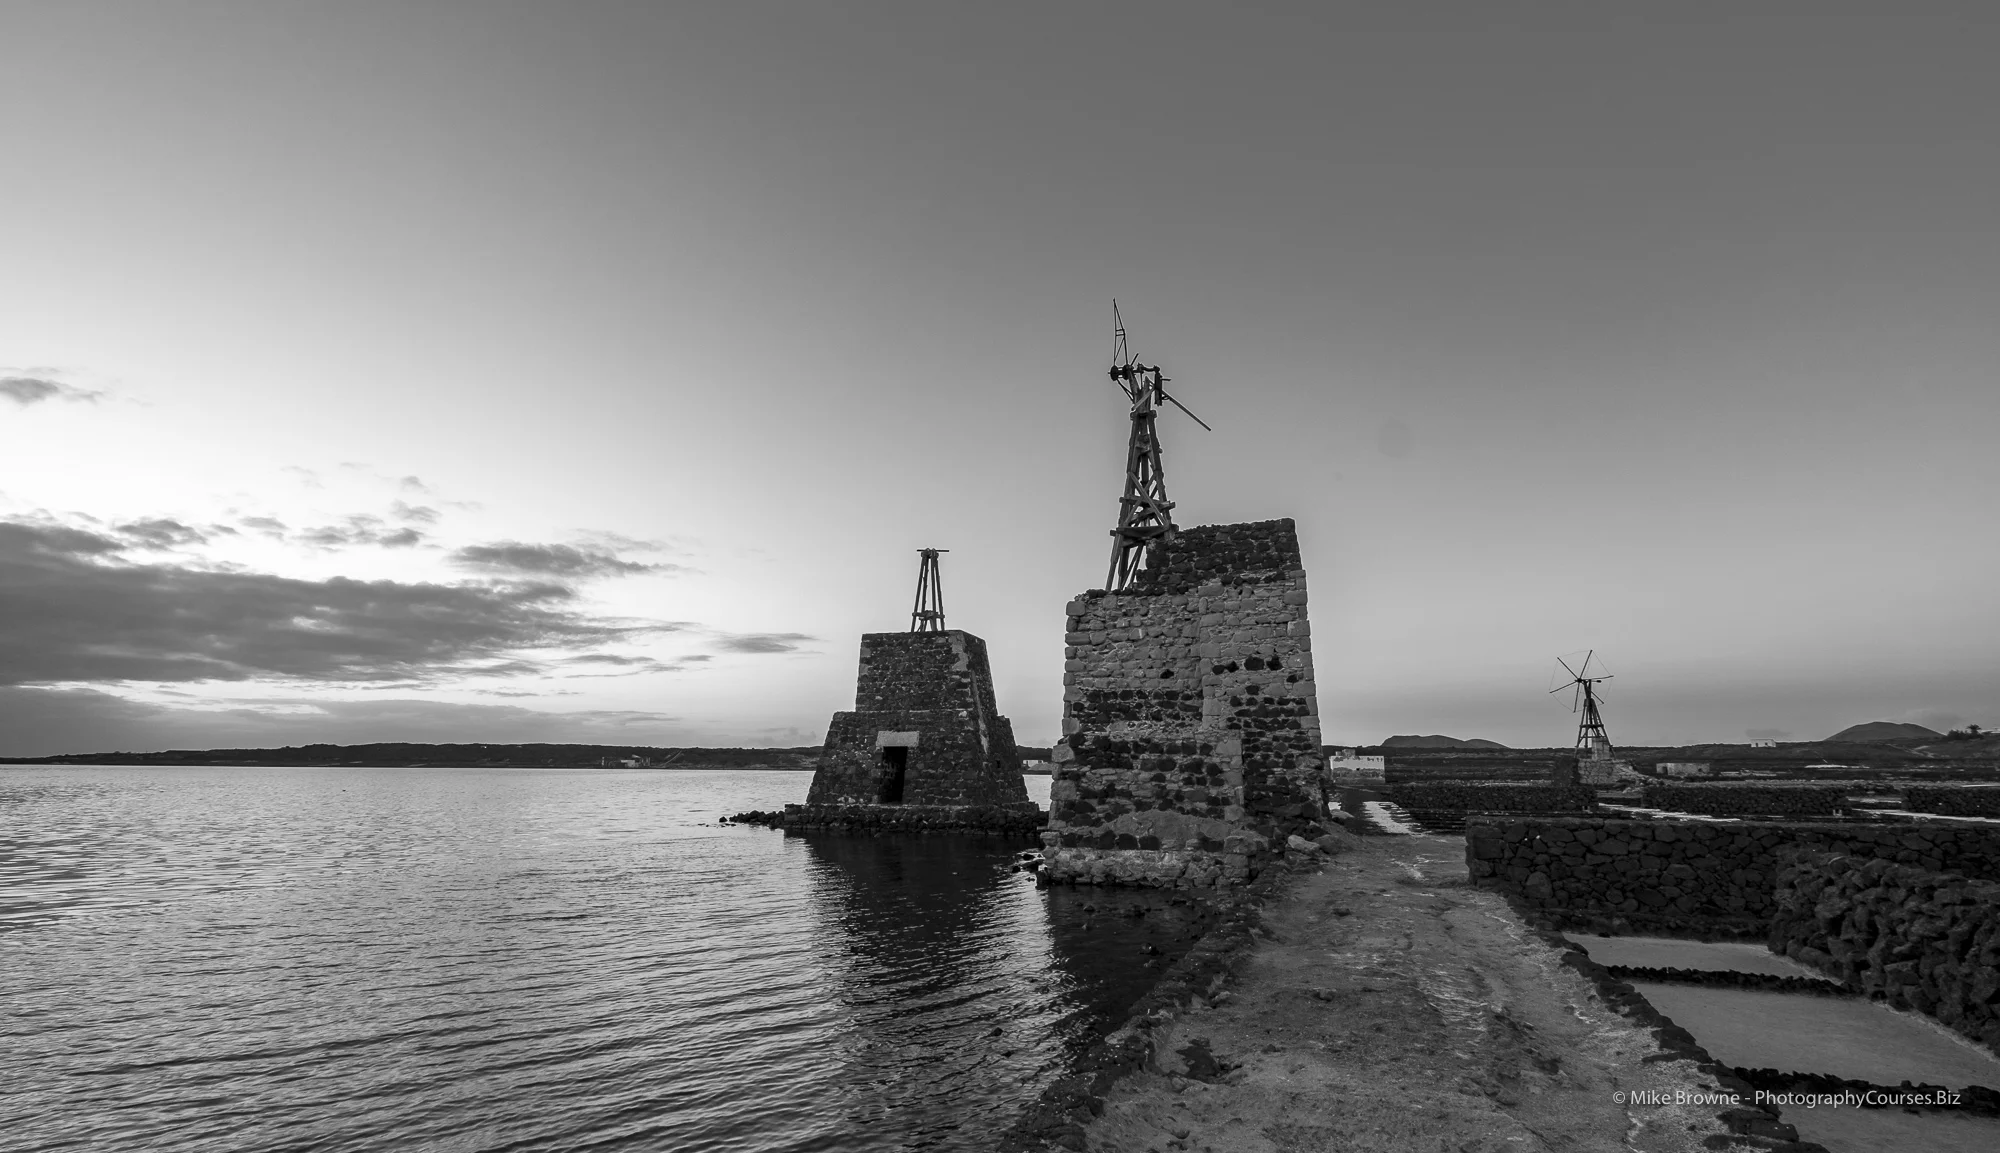 Abandoned windmills deteriorating by the sea